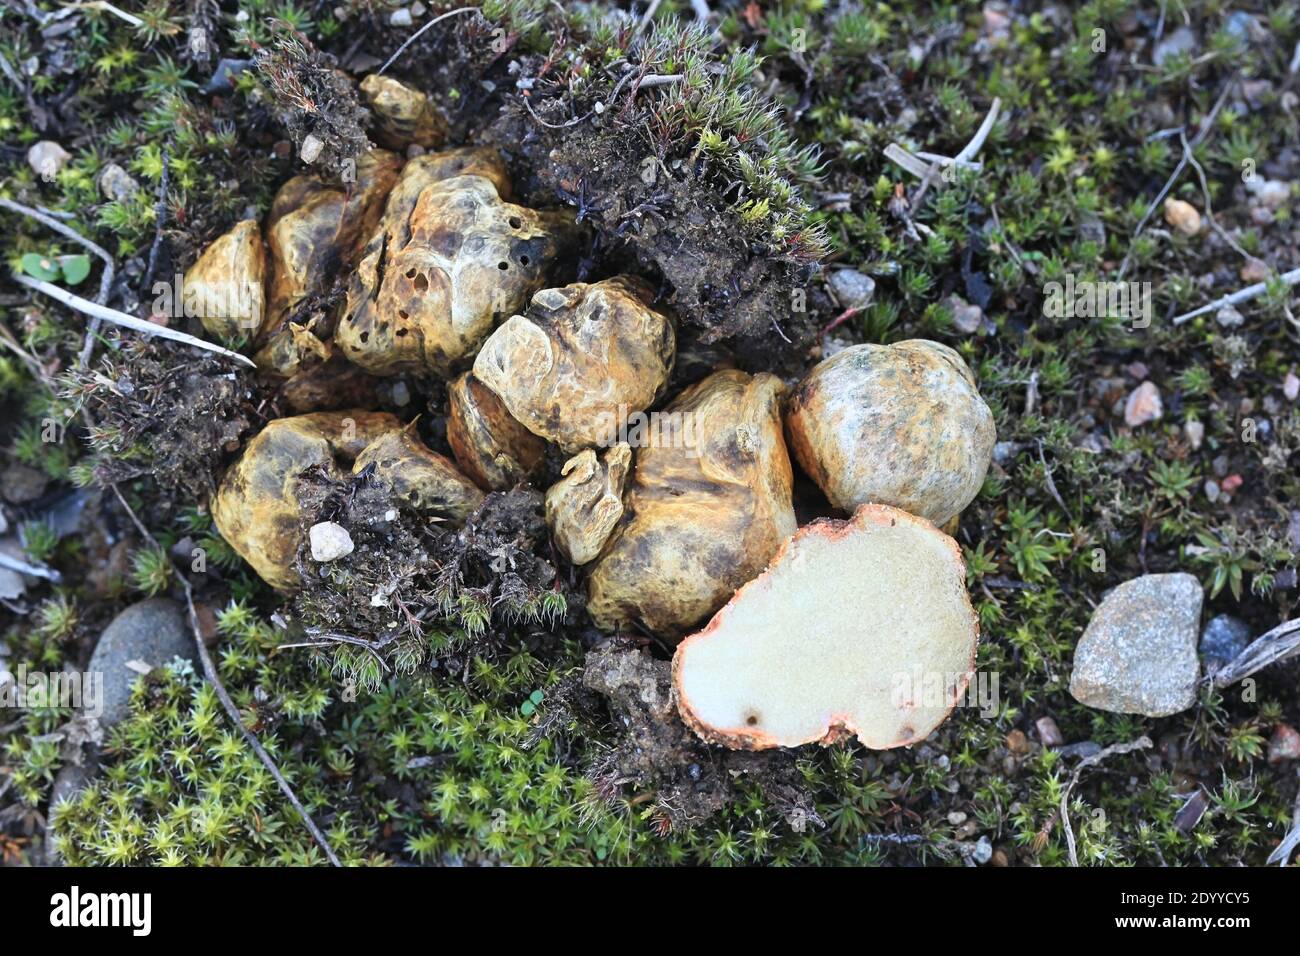 Rhizopogon luteolus, also called Rhizopogon obtextus, commonly known as yellow false truffle, wild fungus from Finland Stock Photo